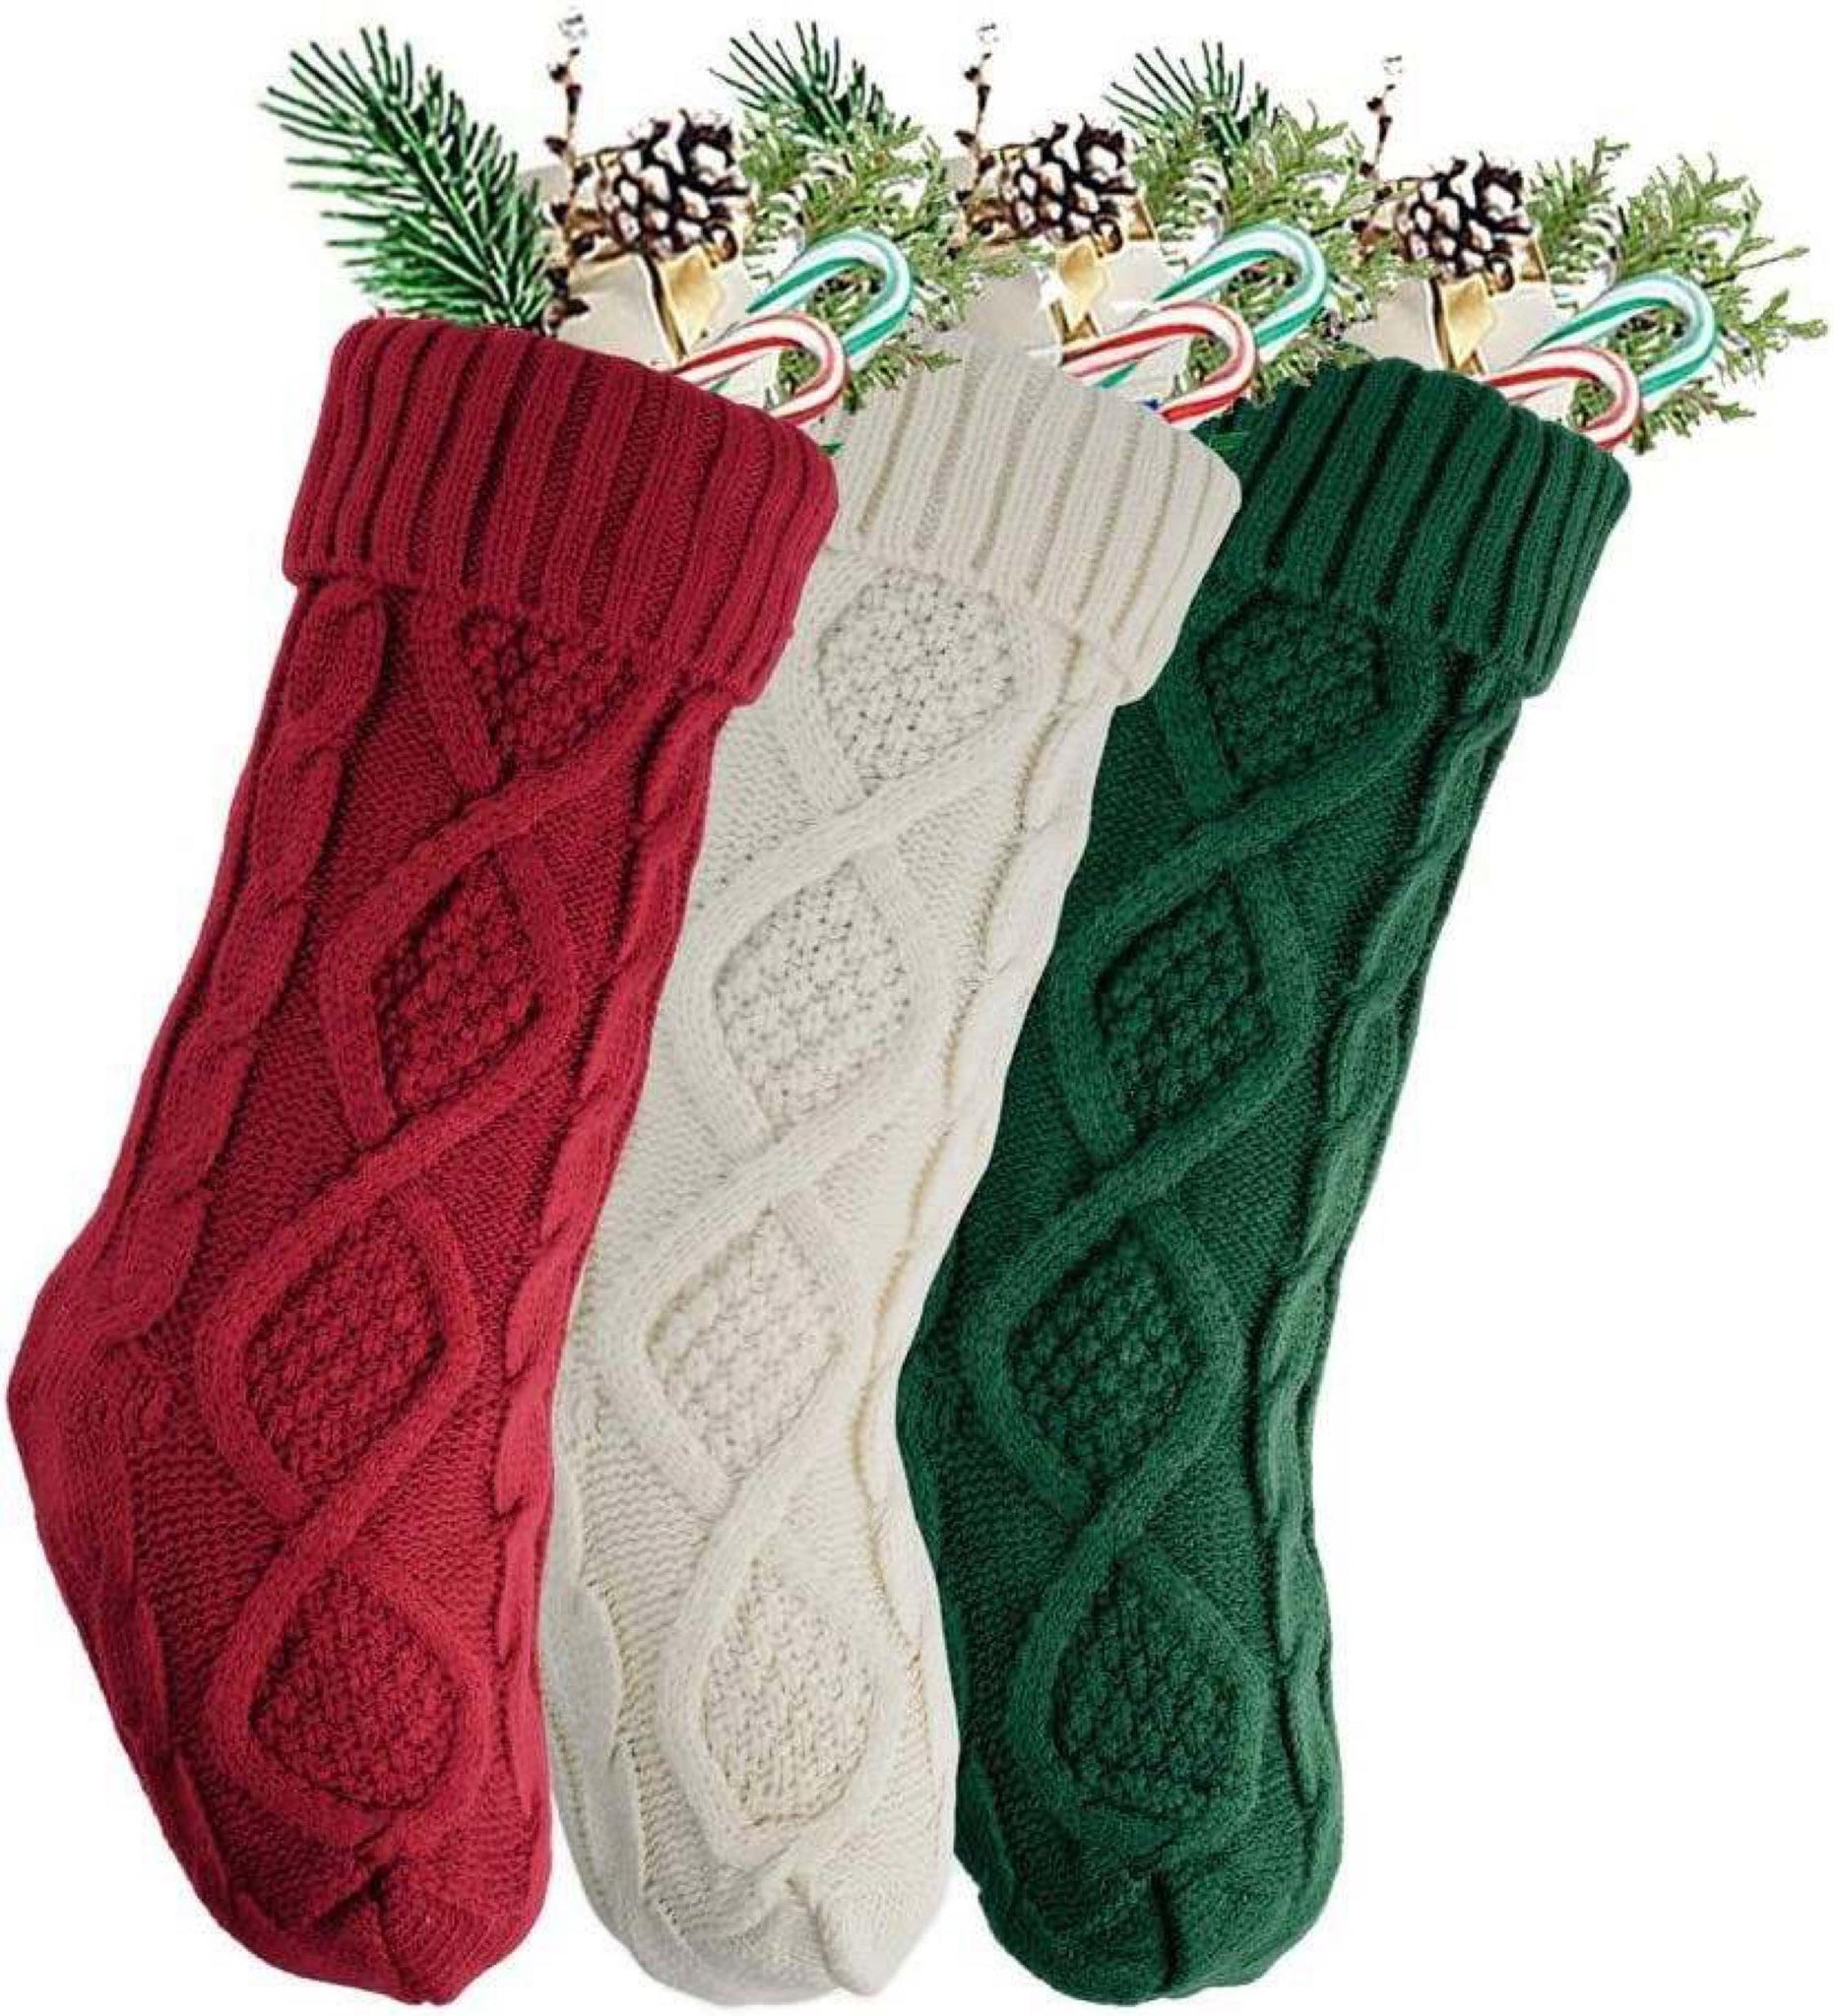 Knit stocking - great with our leather patches